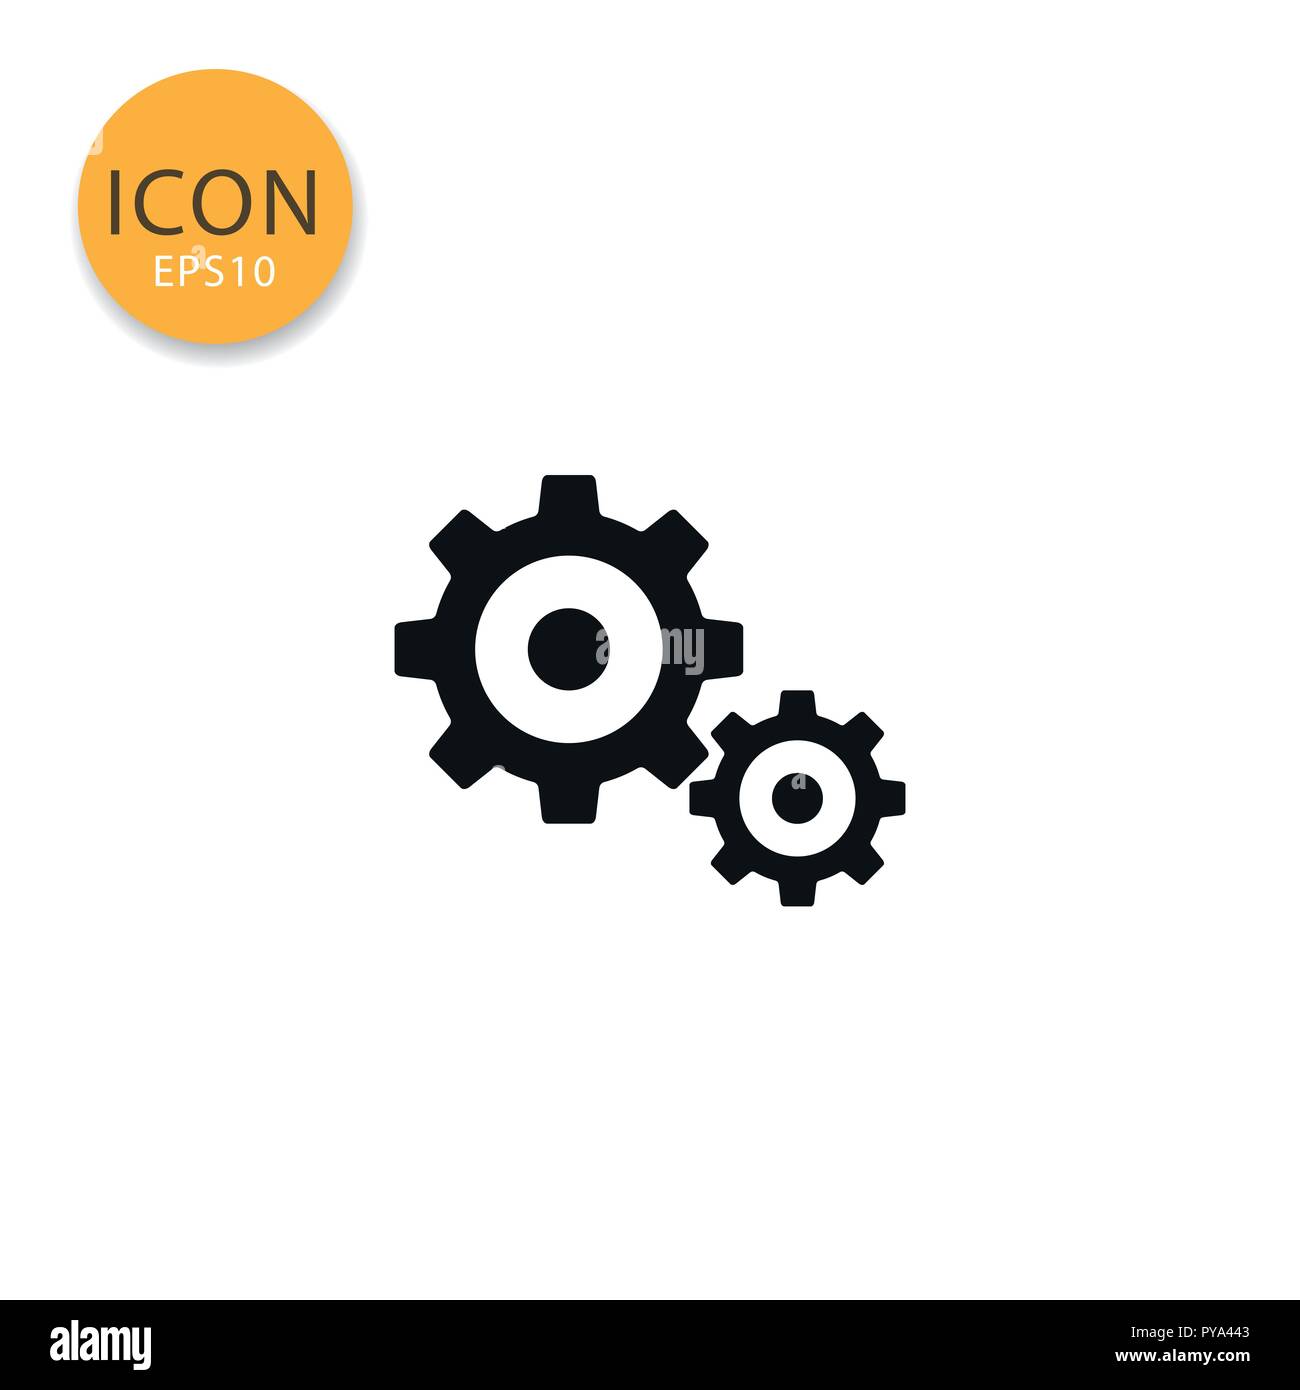 Gears icon flat style in black color vector illustration on white background. Stock Vector